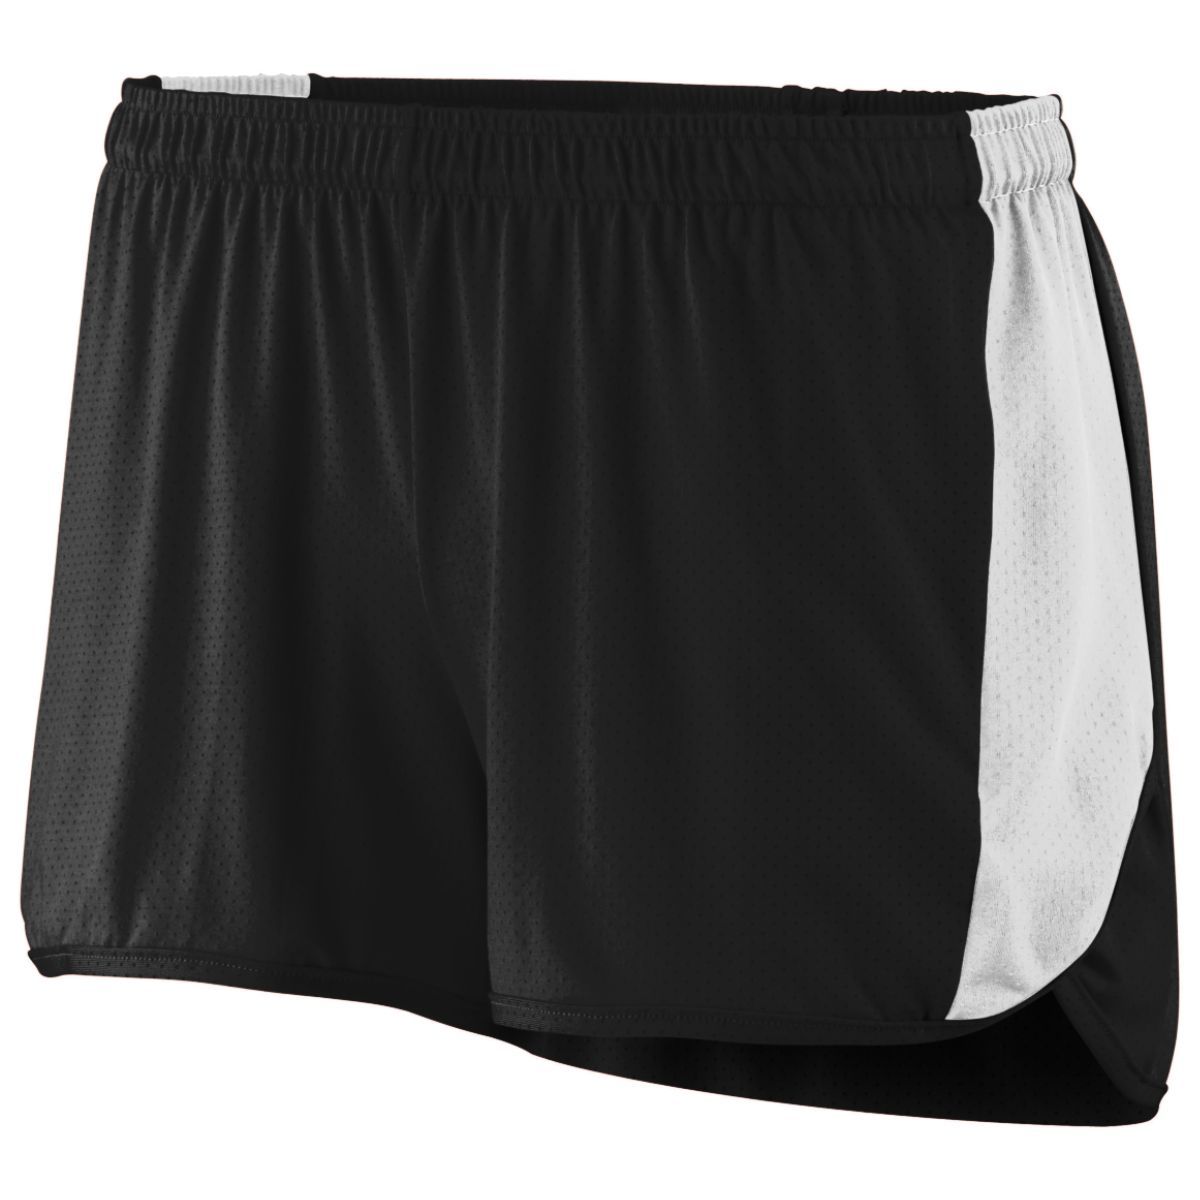 Augusta Sportswear Ladies Sprint Shorts in Black/White  -Part of the Ladies, Ladies-Shorts, Augusta-Products, Track-Field product lines at KanaleyCreations.com